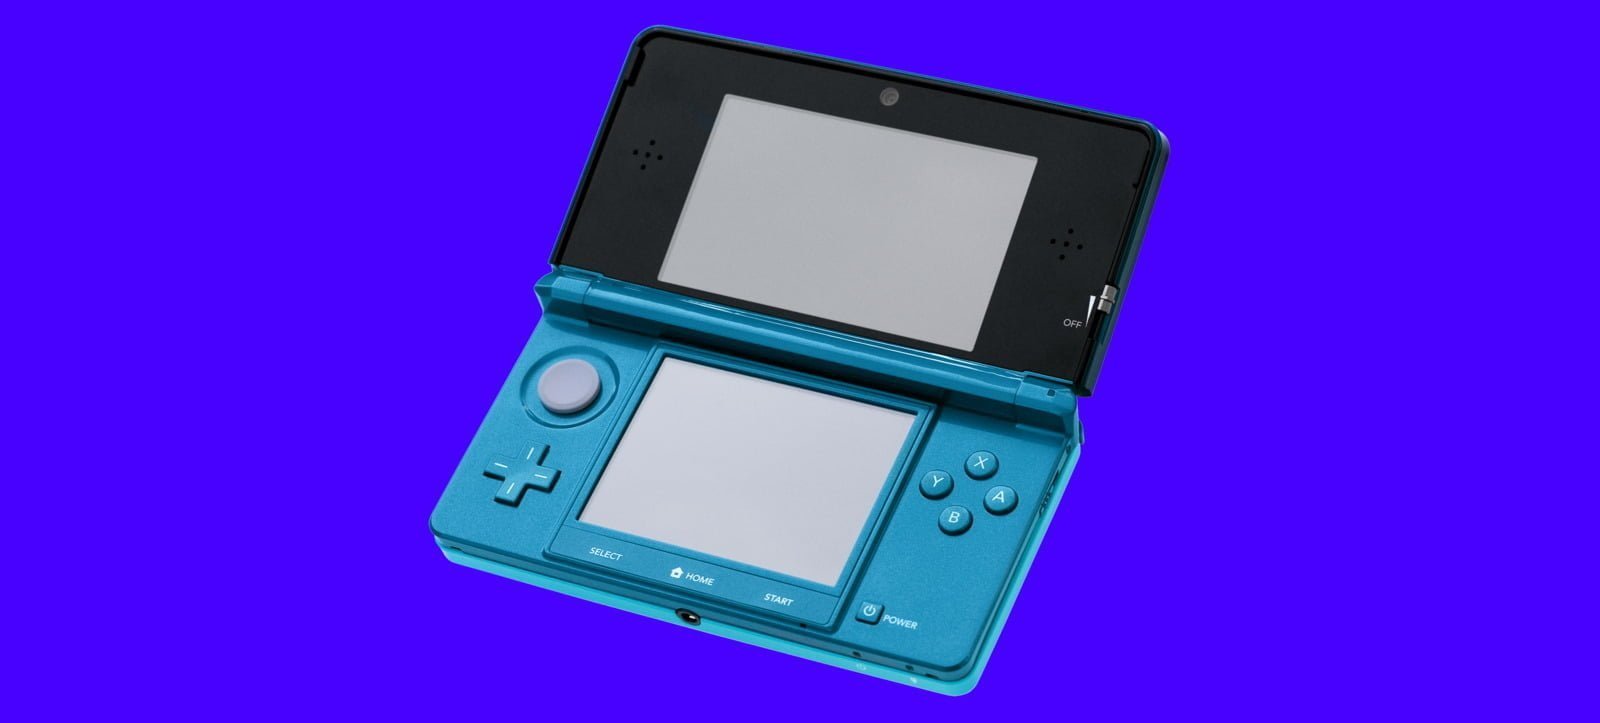 Can’t Get the Parts, Mate: Nintendo 3DS Spare Components Sell Out